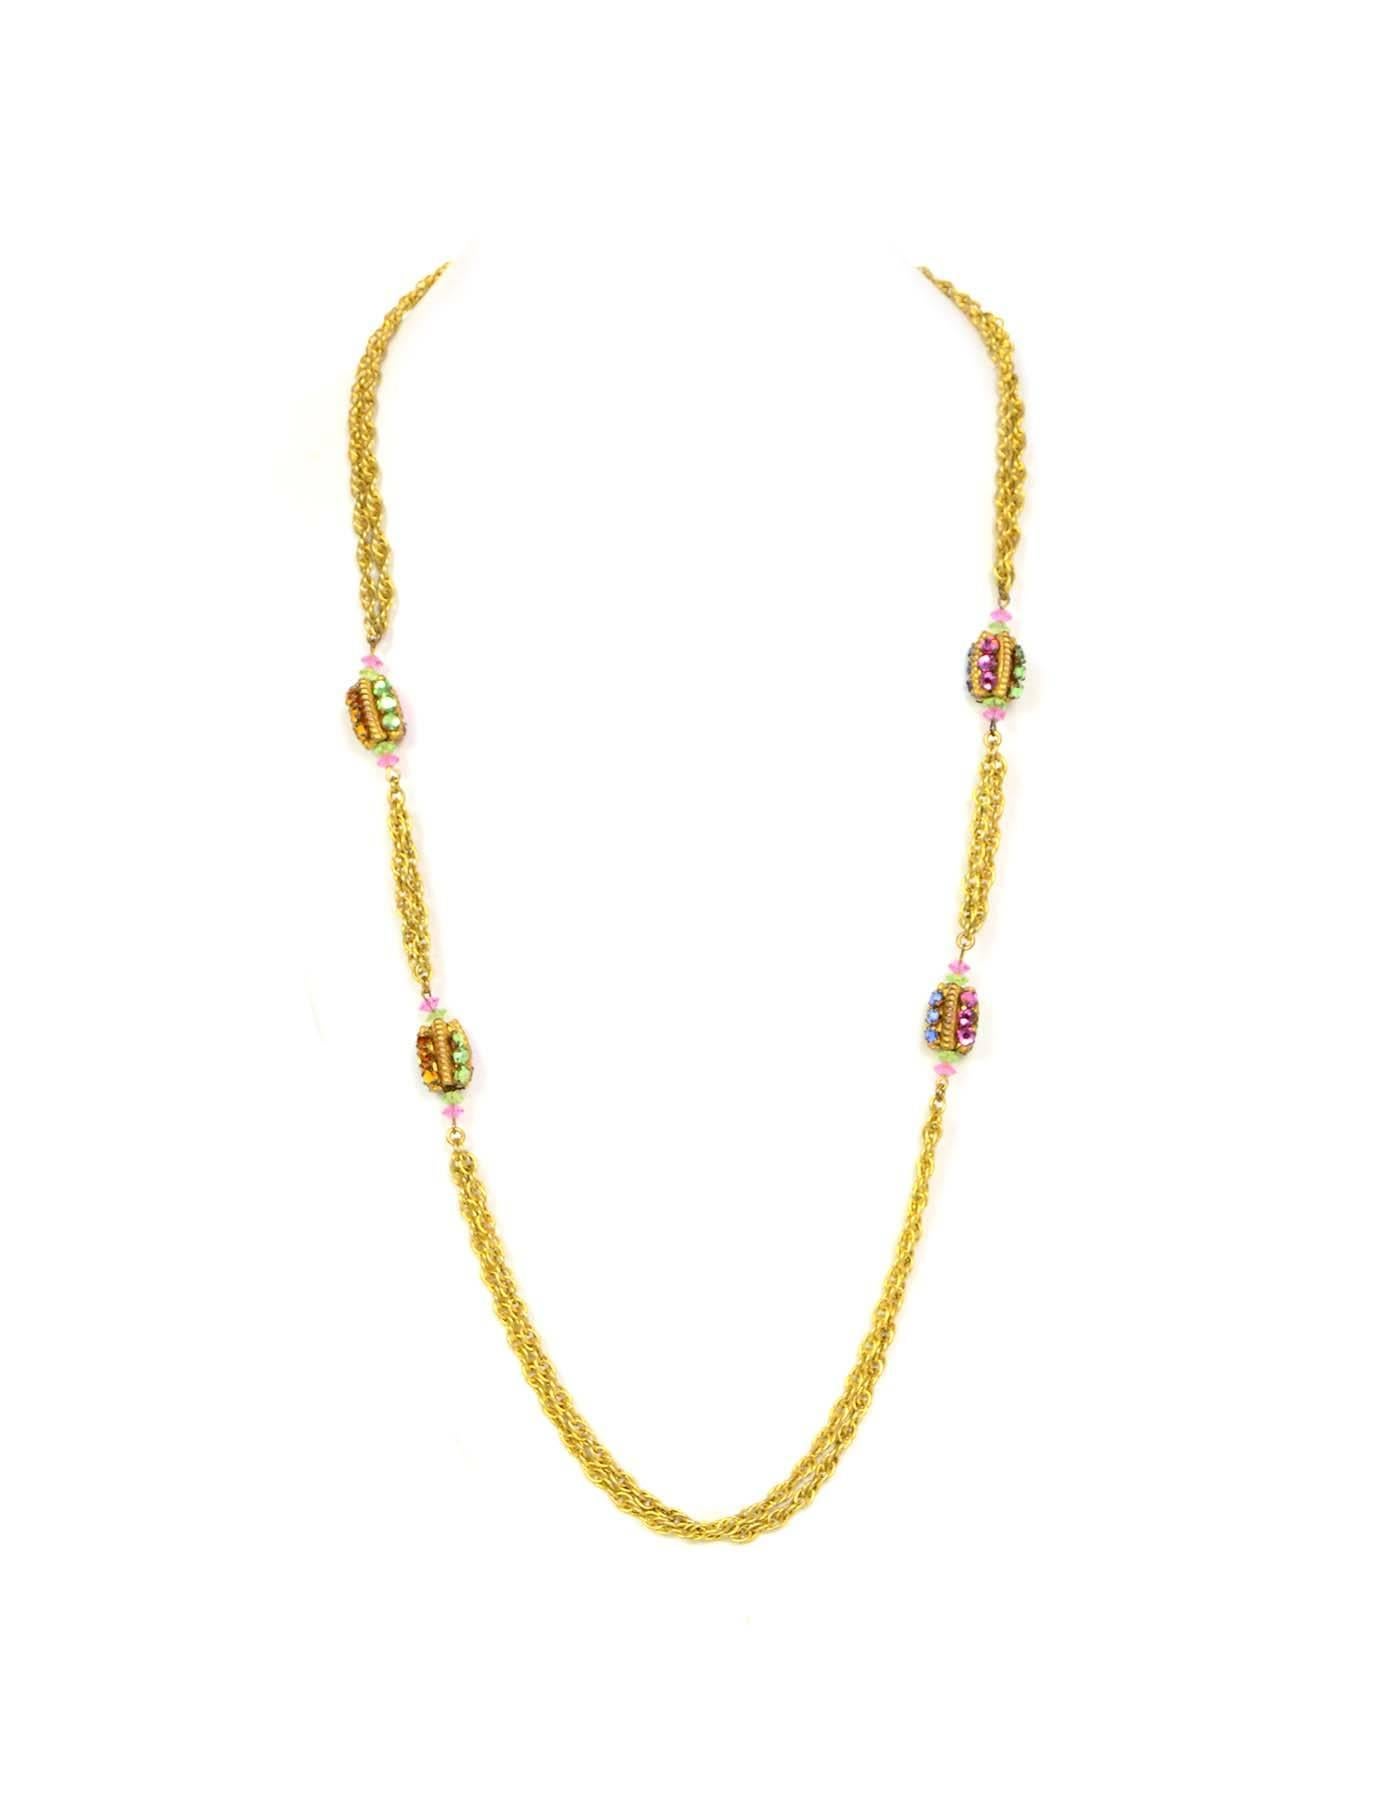 Miriam Haskell Multi-Color Crystal Necklace & Earring Set 

Features gree, pink, blue and orange crystals

Stamp: Miriam Haskell
Closure: Push tab closure for necklace, pierced ears for earrings
Color: Goldtone
Materials: Metal and multi